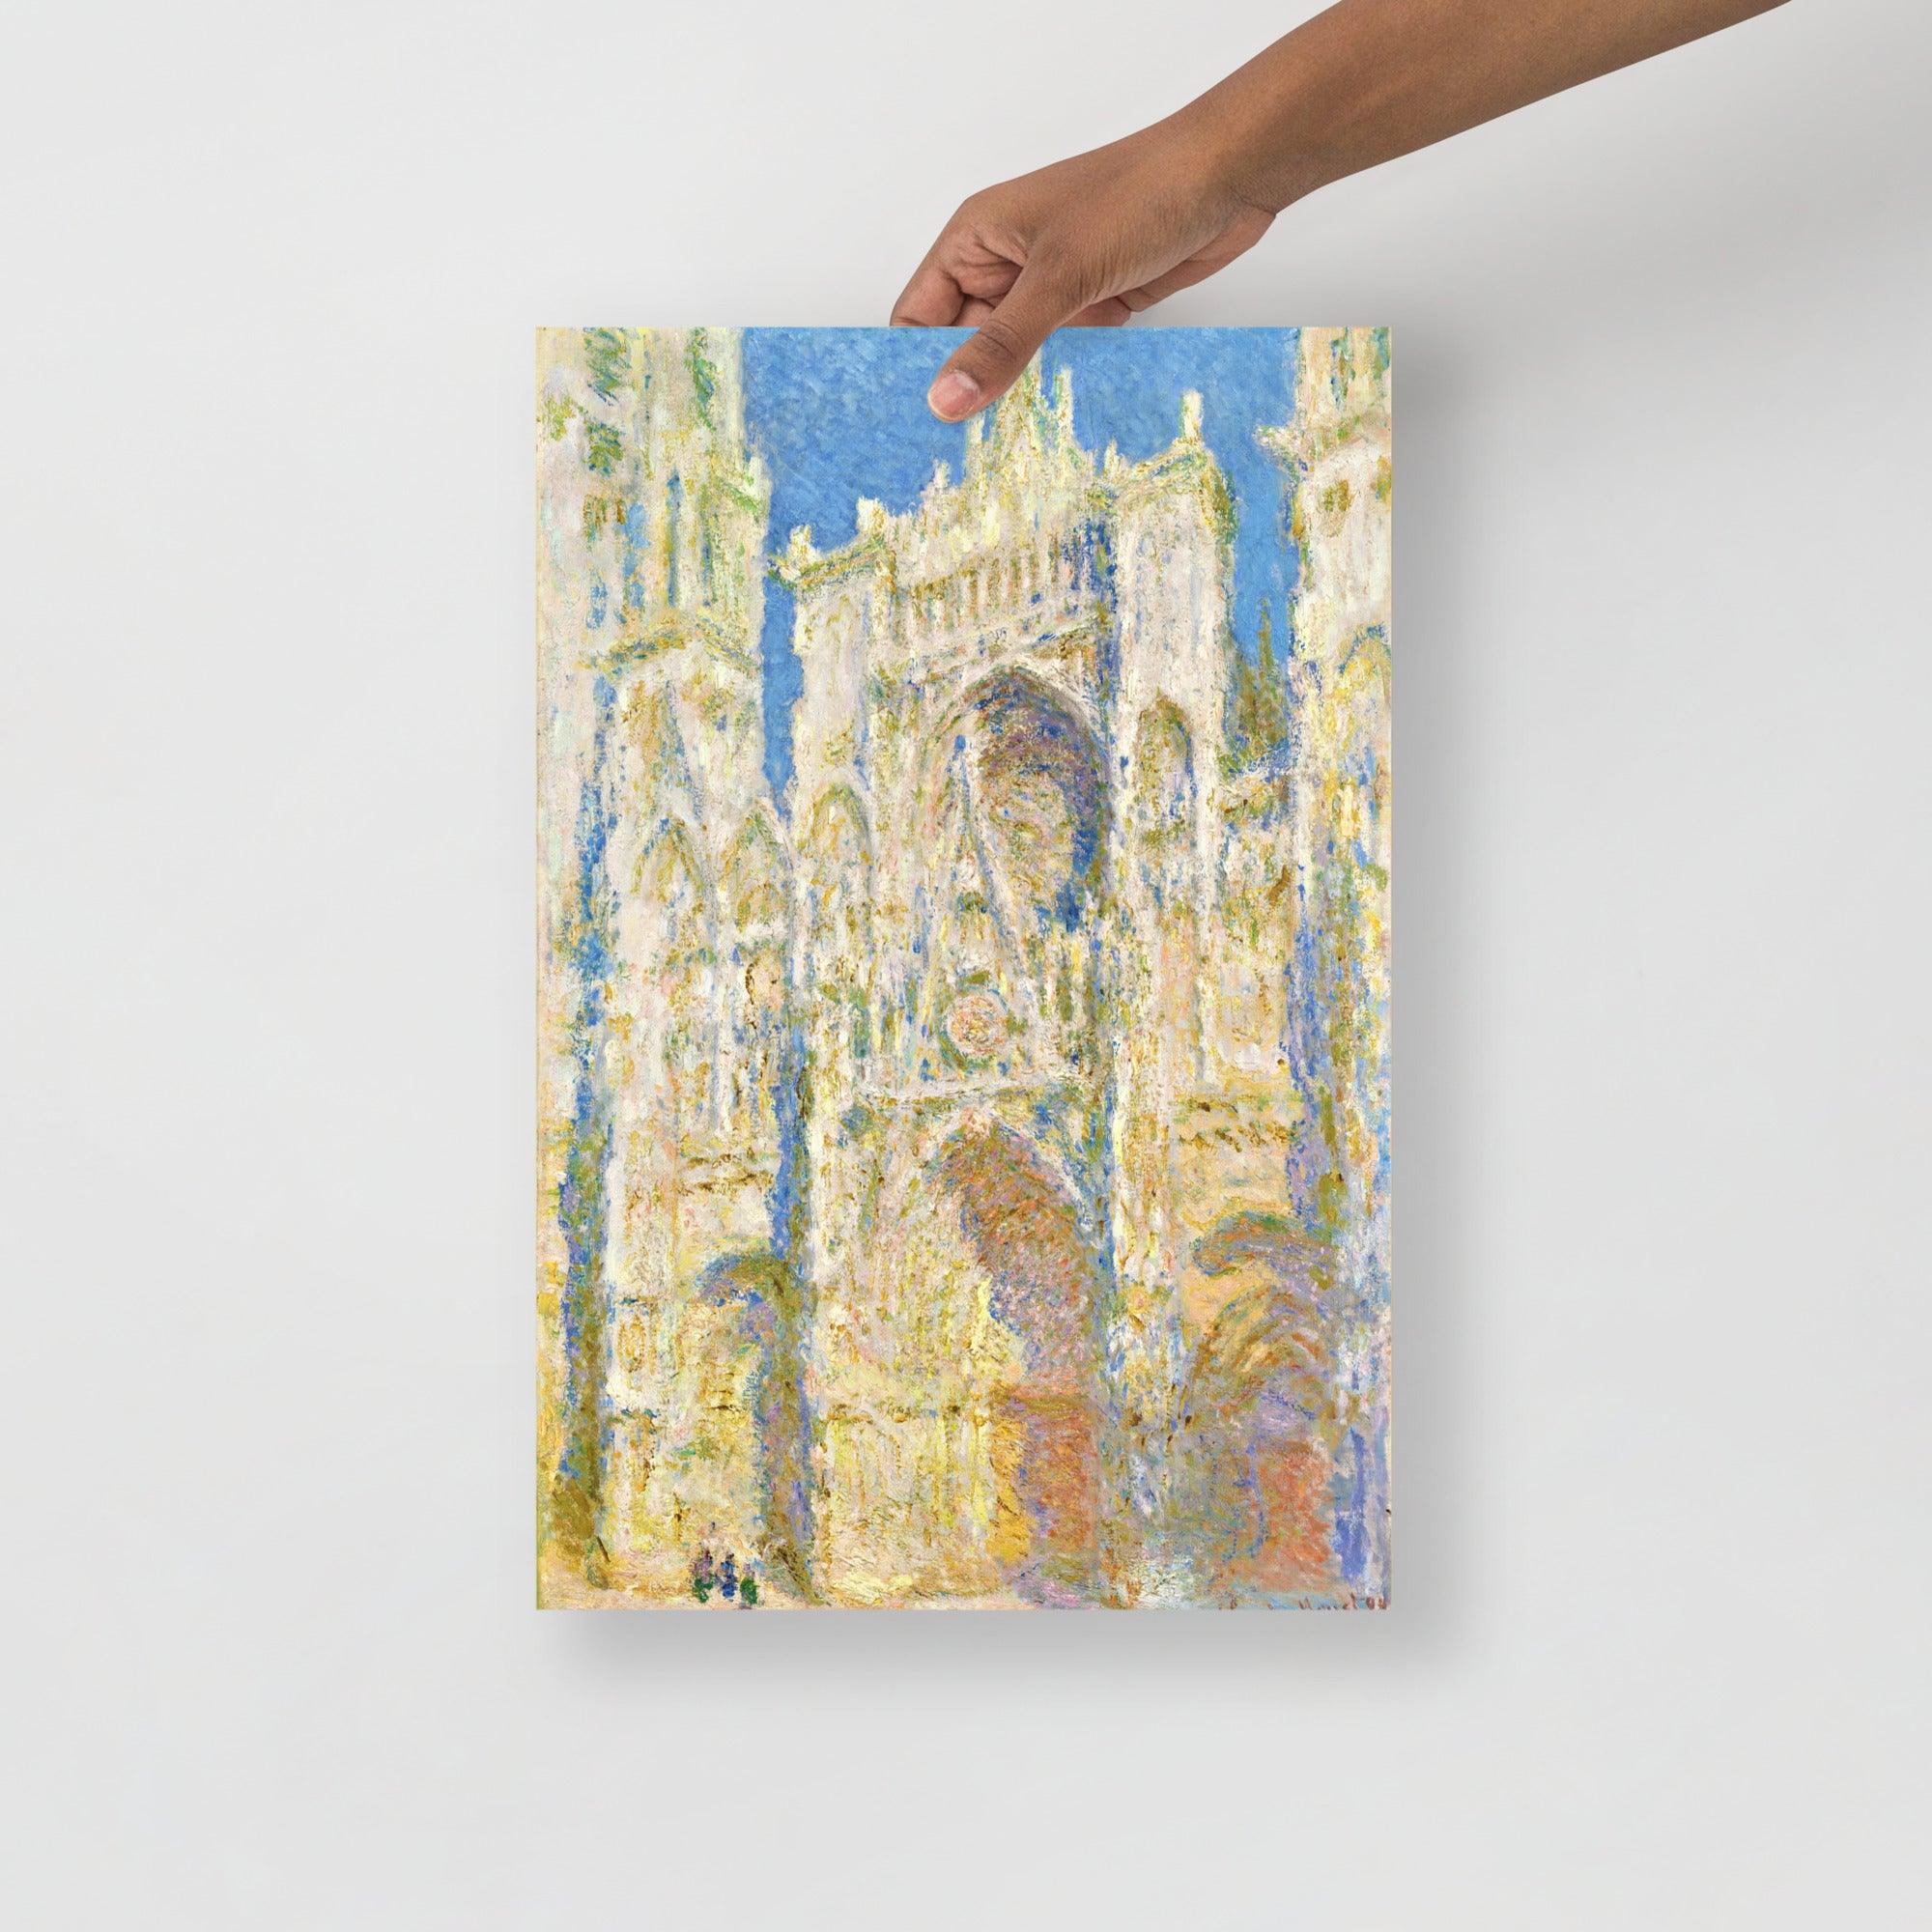 A Rouen Cathedral, West Facade by Claude Monet poster on a plain backdrop in size 12x18”.